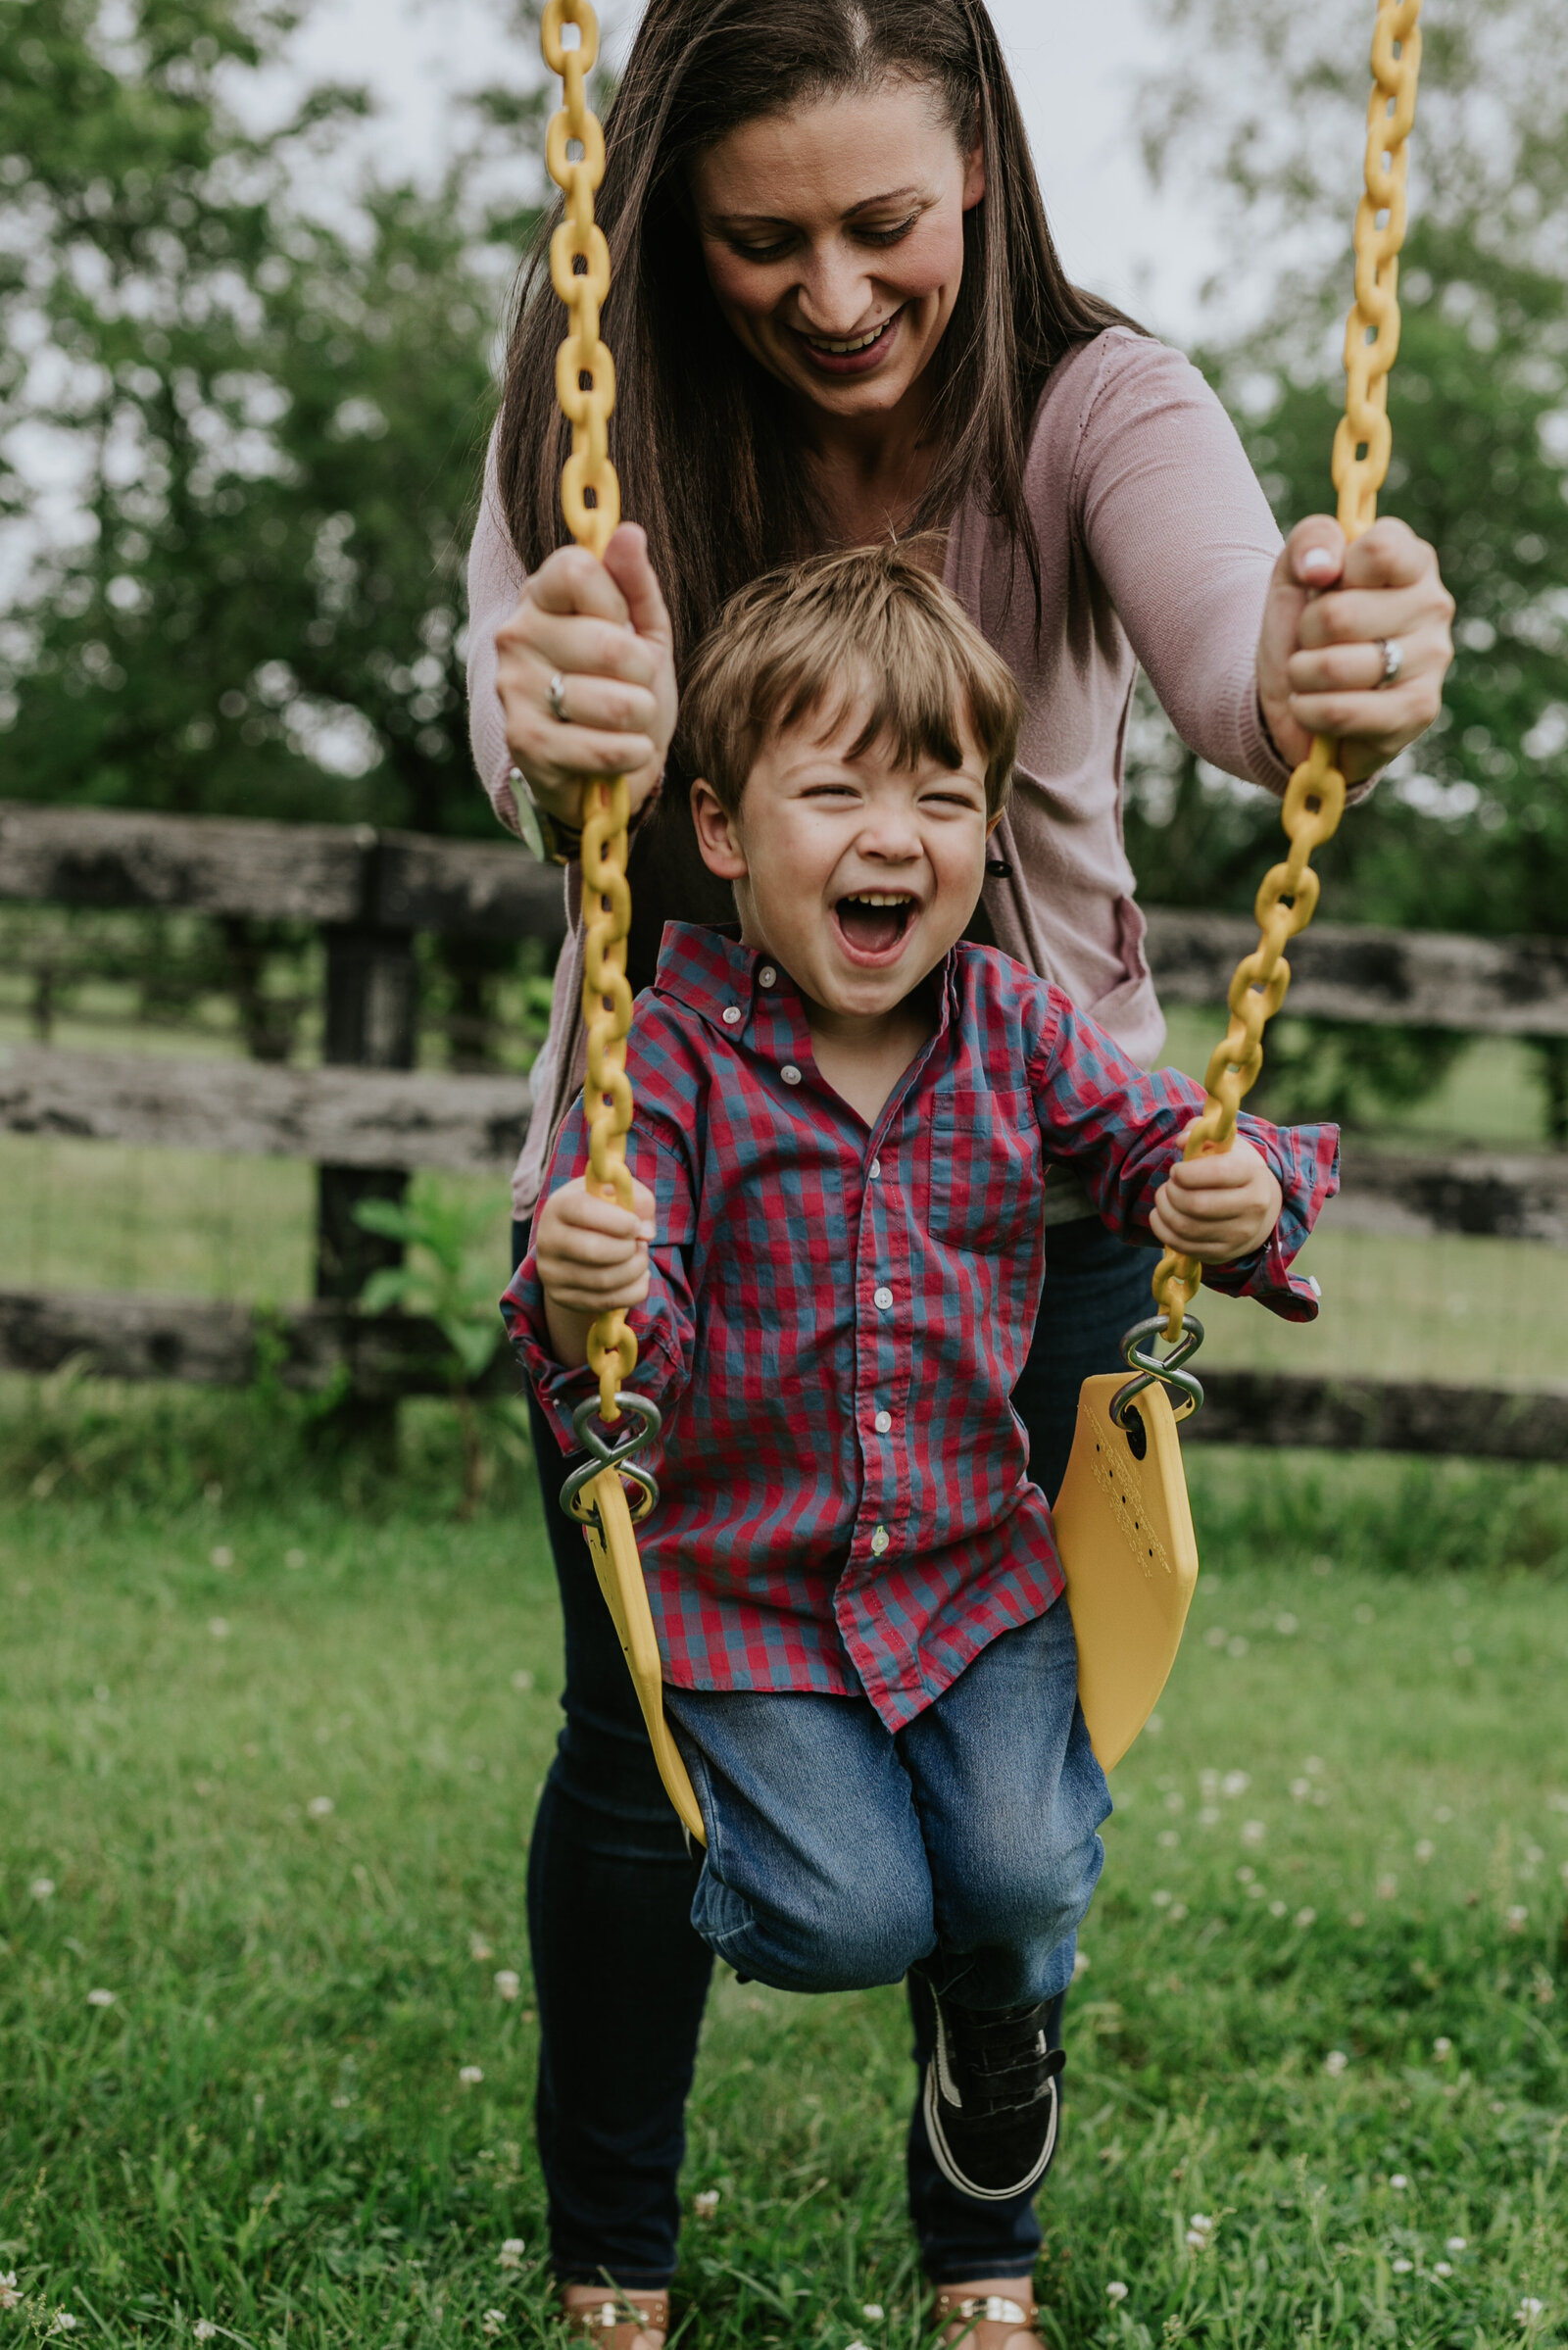 A young boy laughs as his mother pushes him on a swing